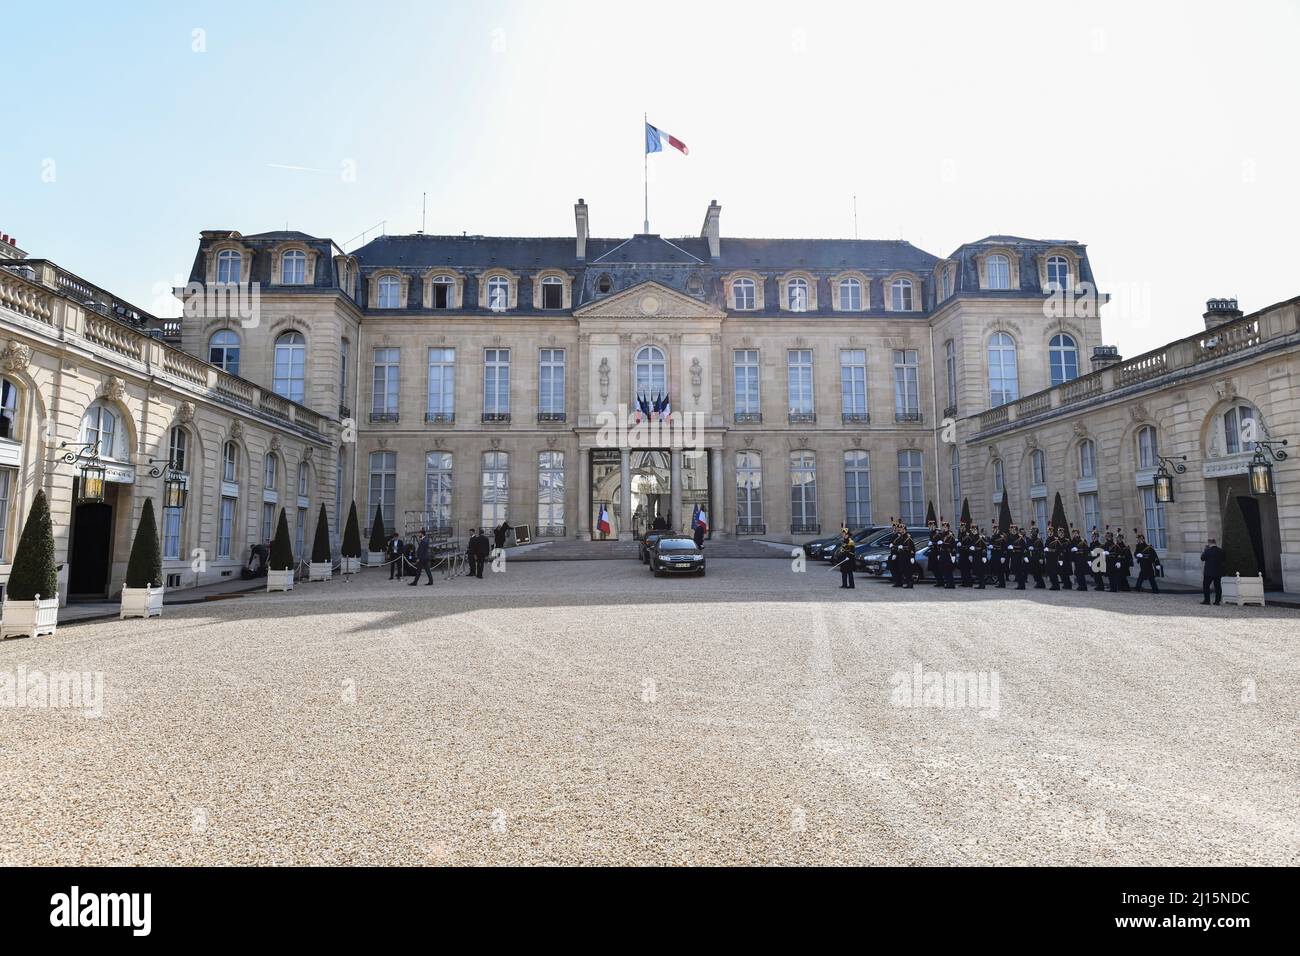 Illustration picture shows the entrance (inside the courtyard) to the Presiential Elysee Palace (Palais de l'Elysée). Stock Photo